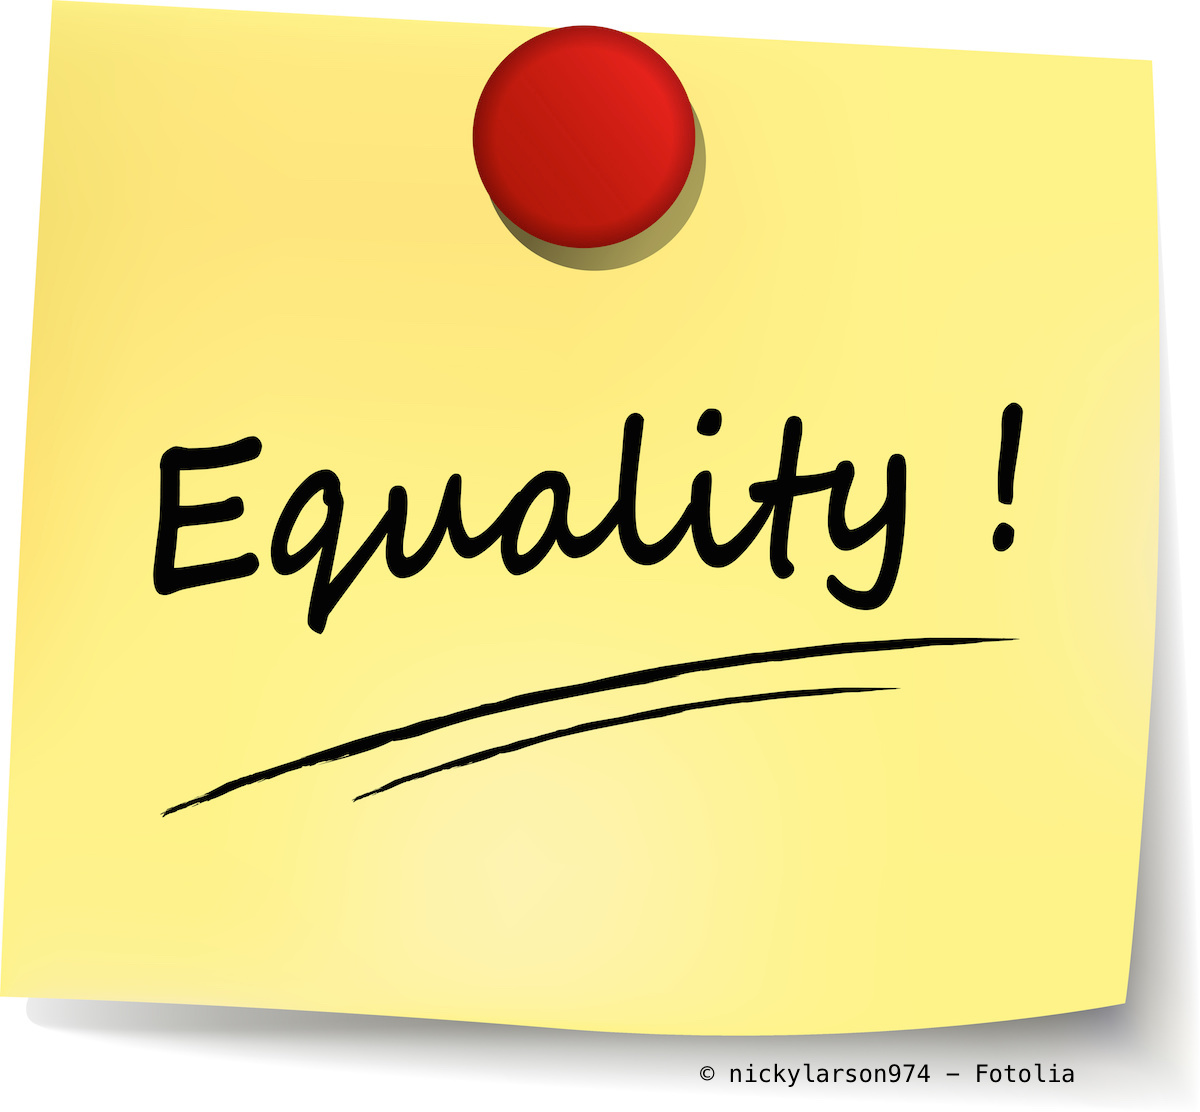 Fotolia_79727384.jpg (equality yellow note)